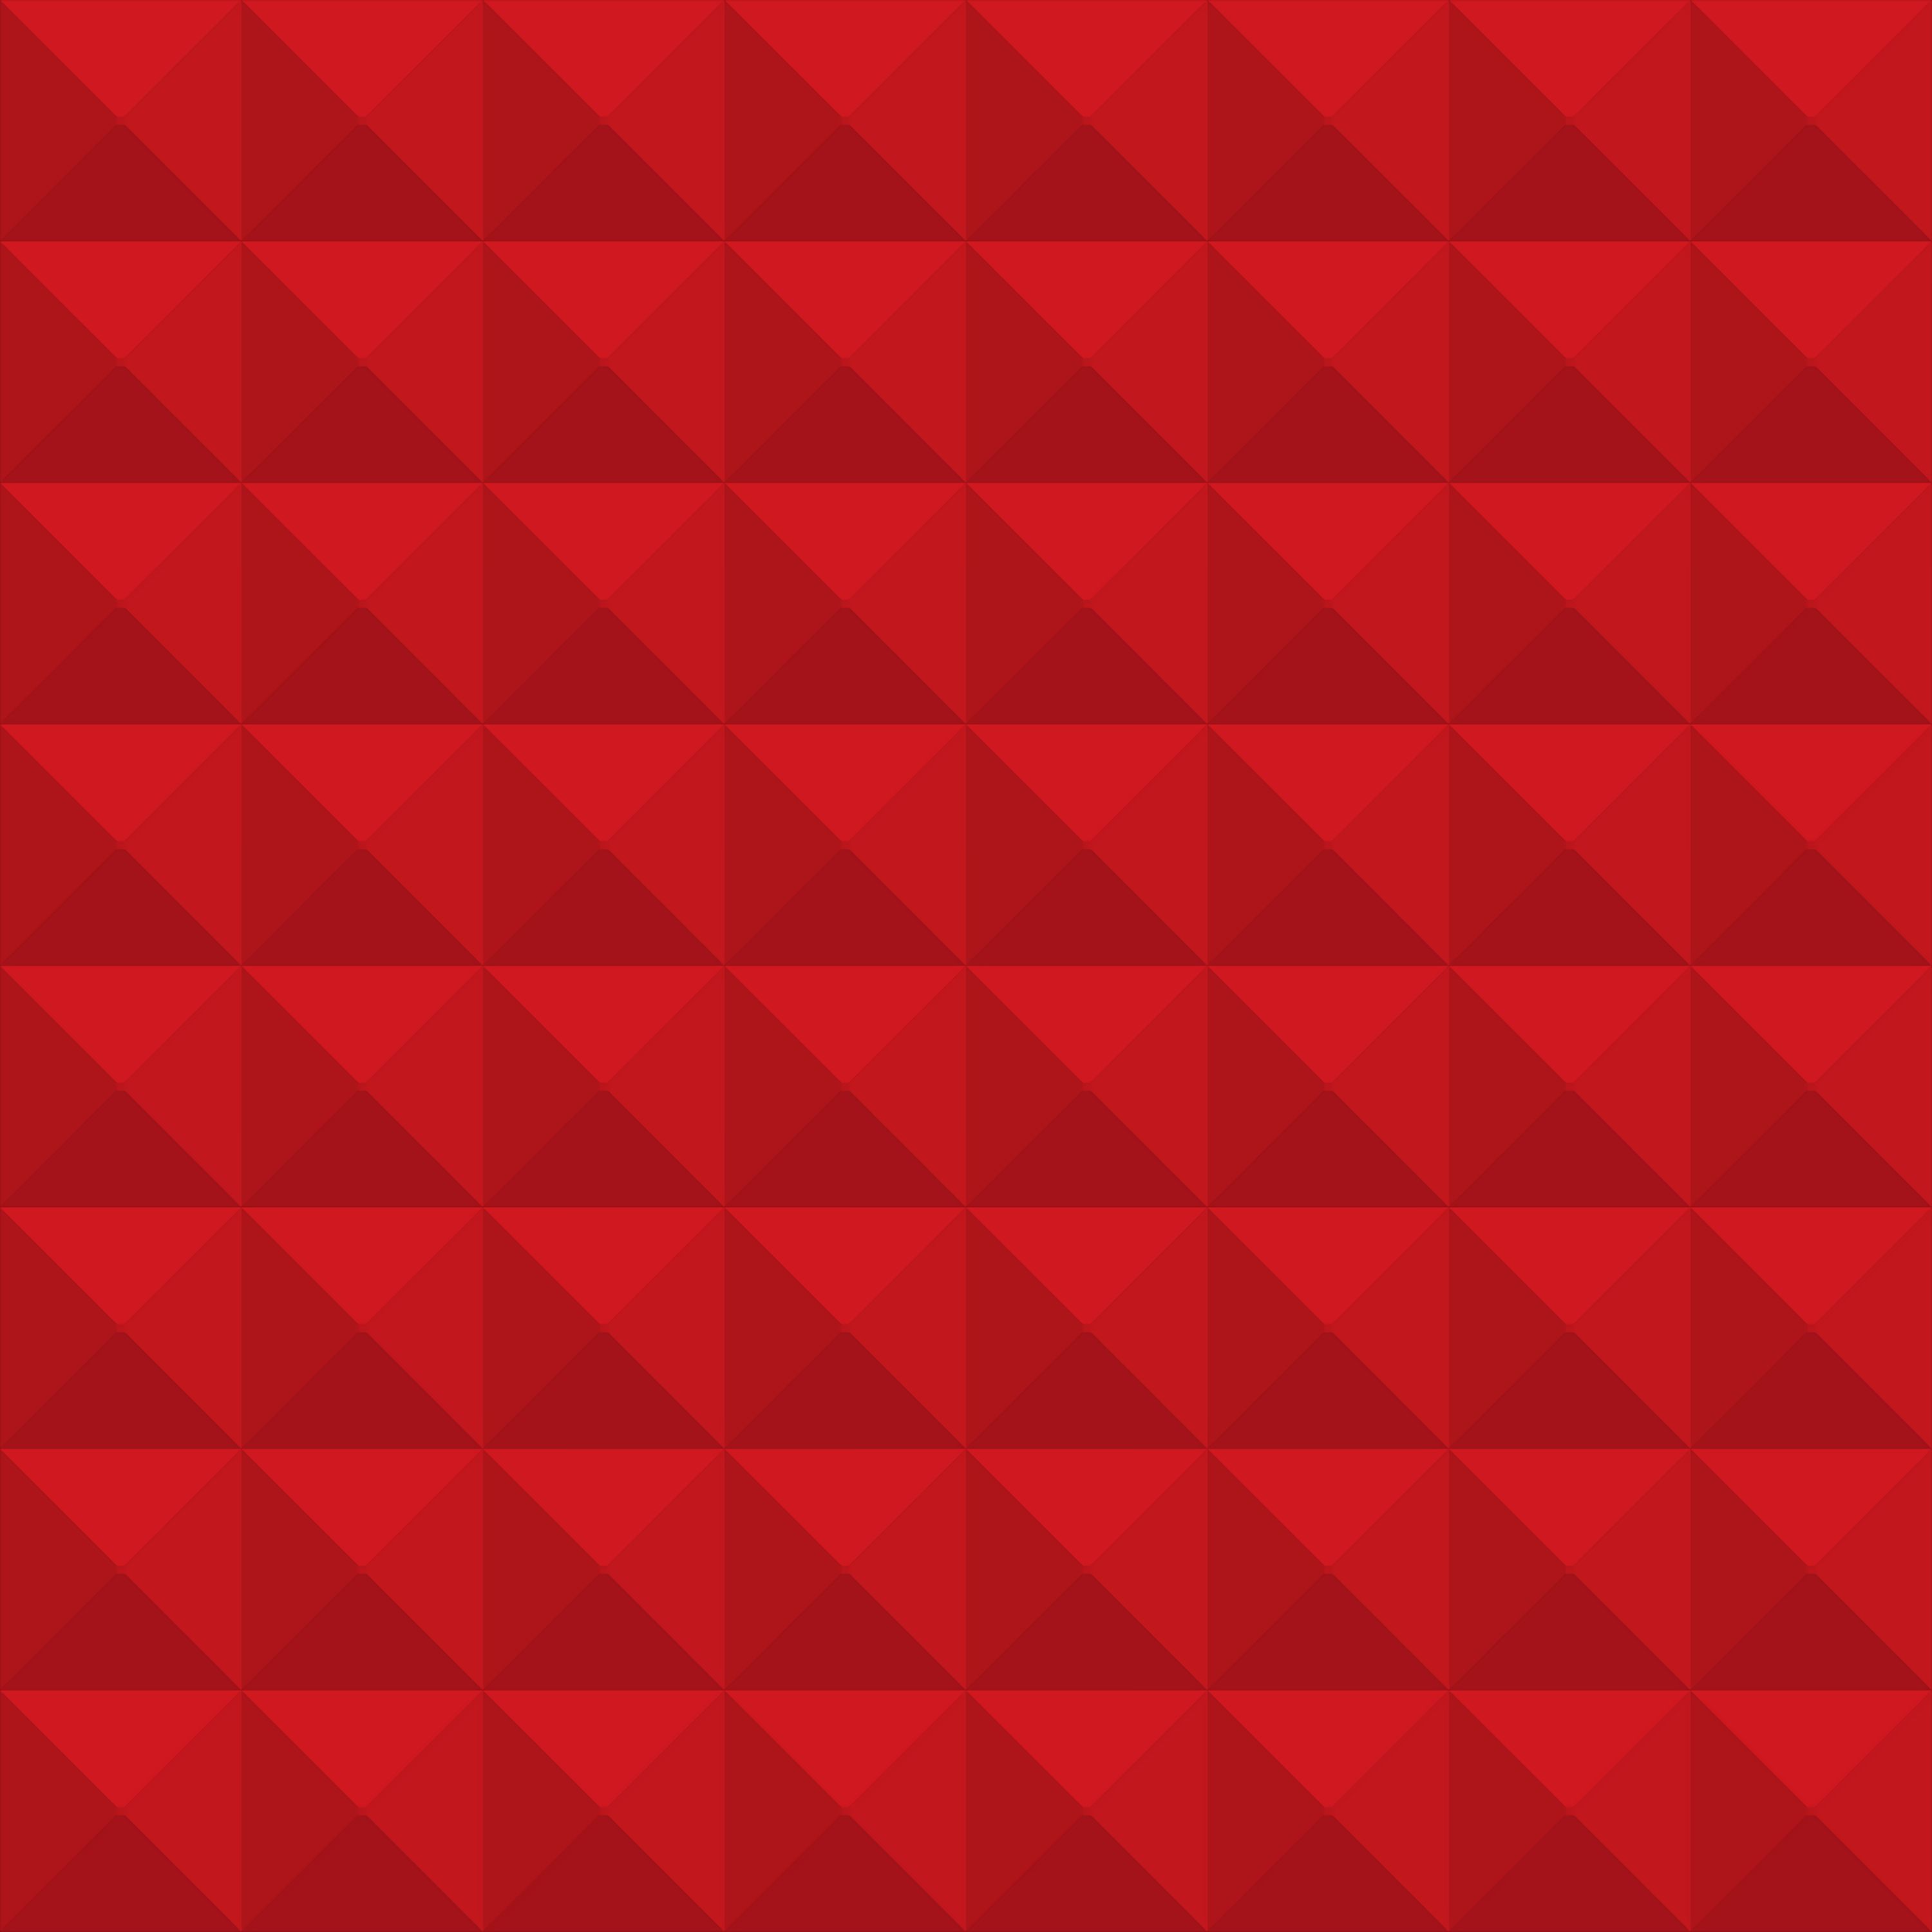 red, pattern, texture, textures, relief, symmetry, geometric, shades, squares, raised, triangles